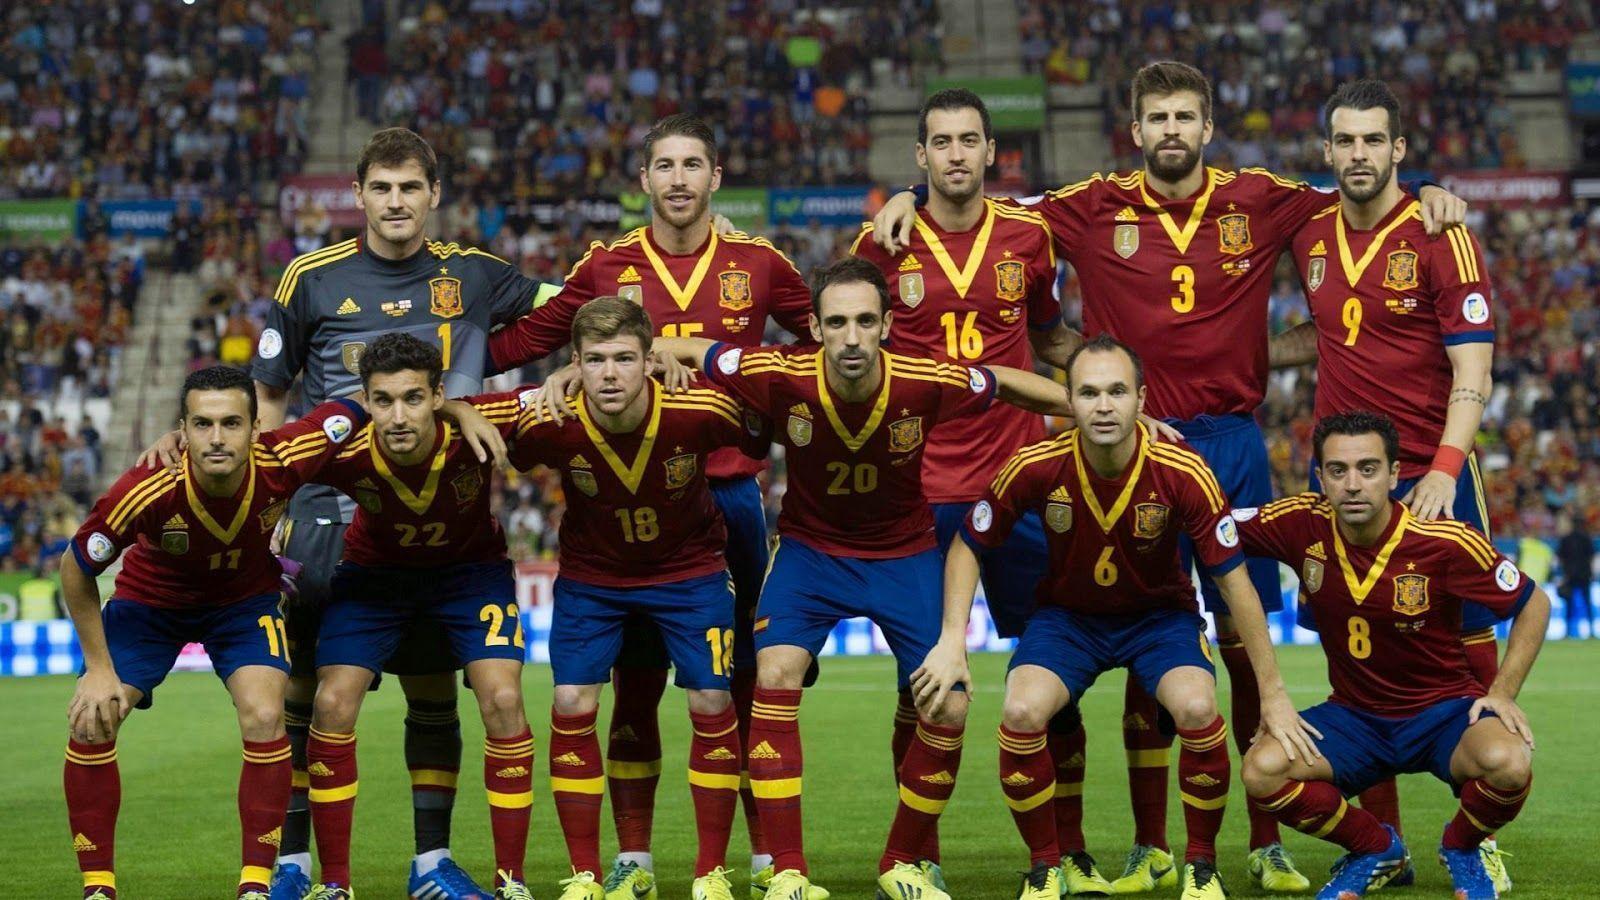 Spain national football team Wallpapers and Background Images